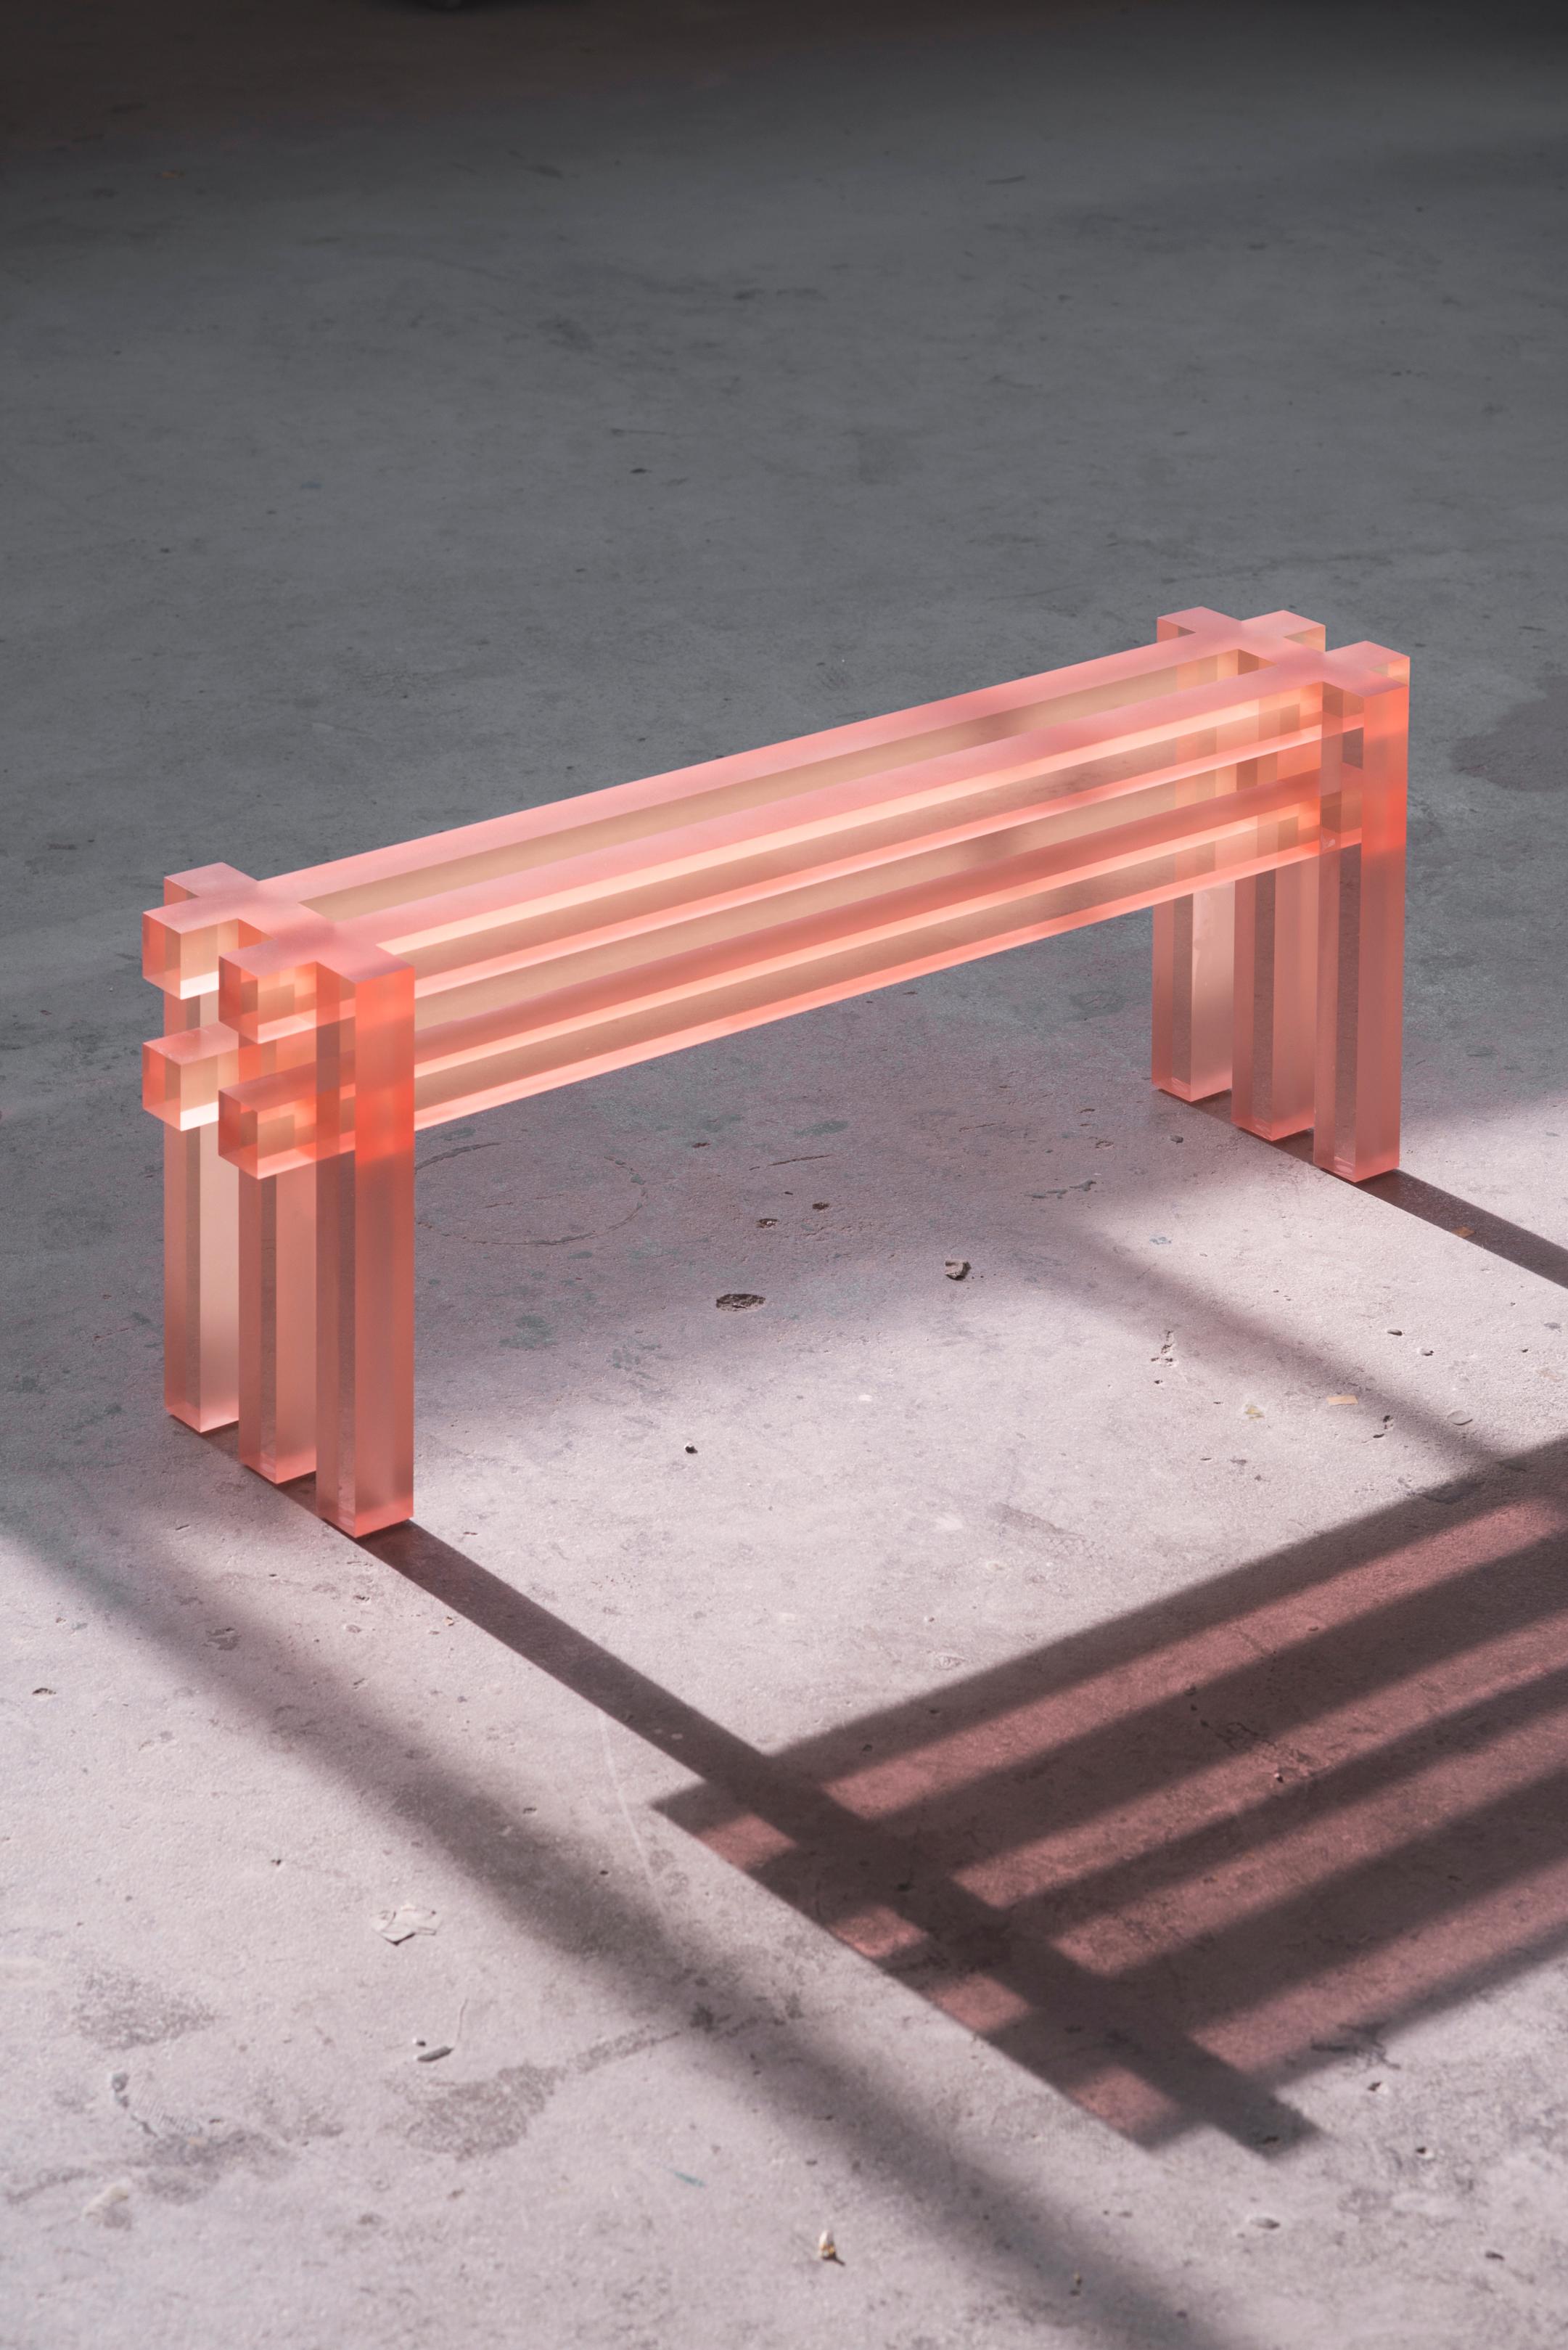 Translucid bench by Laurids Gallée
Dimensions: W 125 x D 25 x H 45 cm
Materials: Resin
Weight: 42 kg

Born in Austria in 1988, Laurids Gallée is based in Rotterdam. After studying Anthropology in Vienna, he moves to the Netherlands, where he